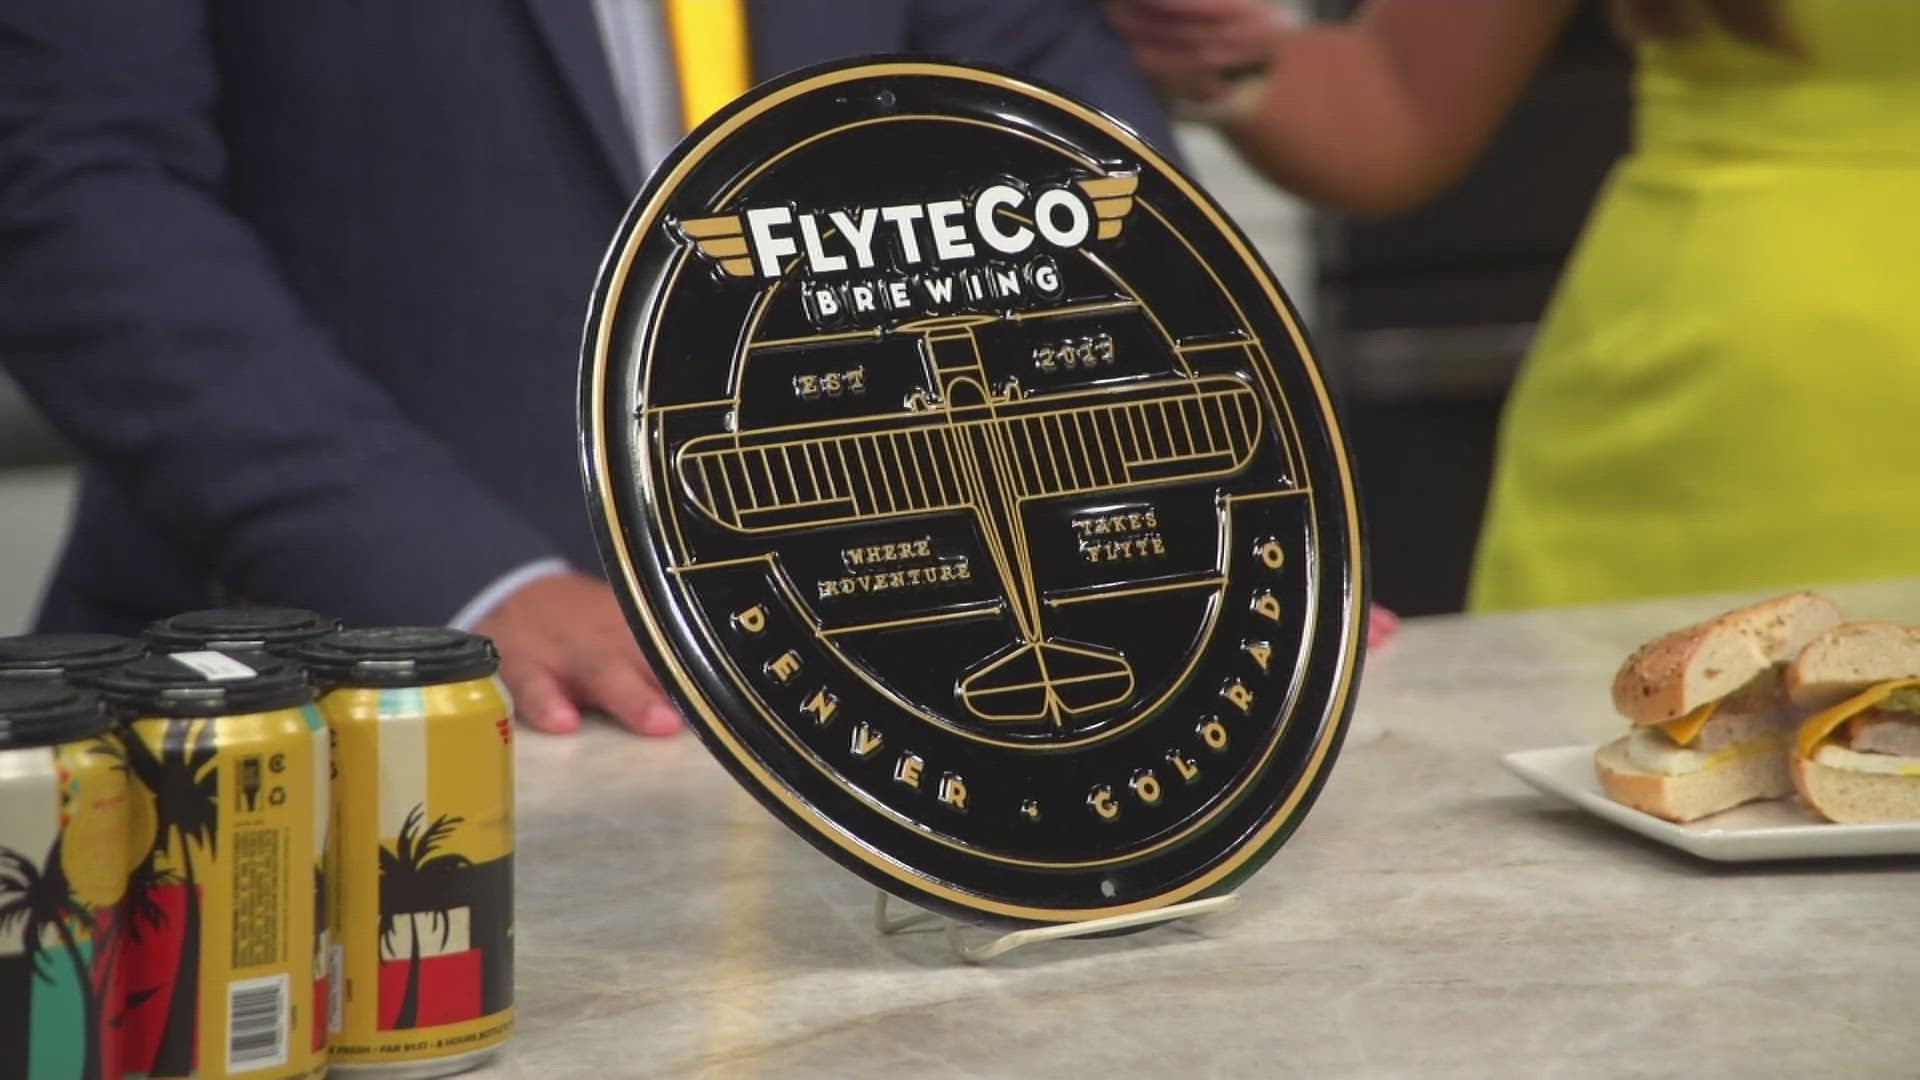 FlyteCo Tower co-owner Morgan O'Sullivan talks about plans to celebrate the restaurant's 1st anniversary and raise money for scholarships to get women into aviation.